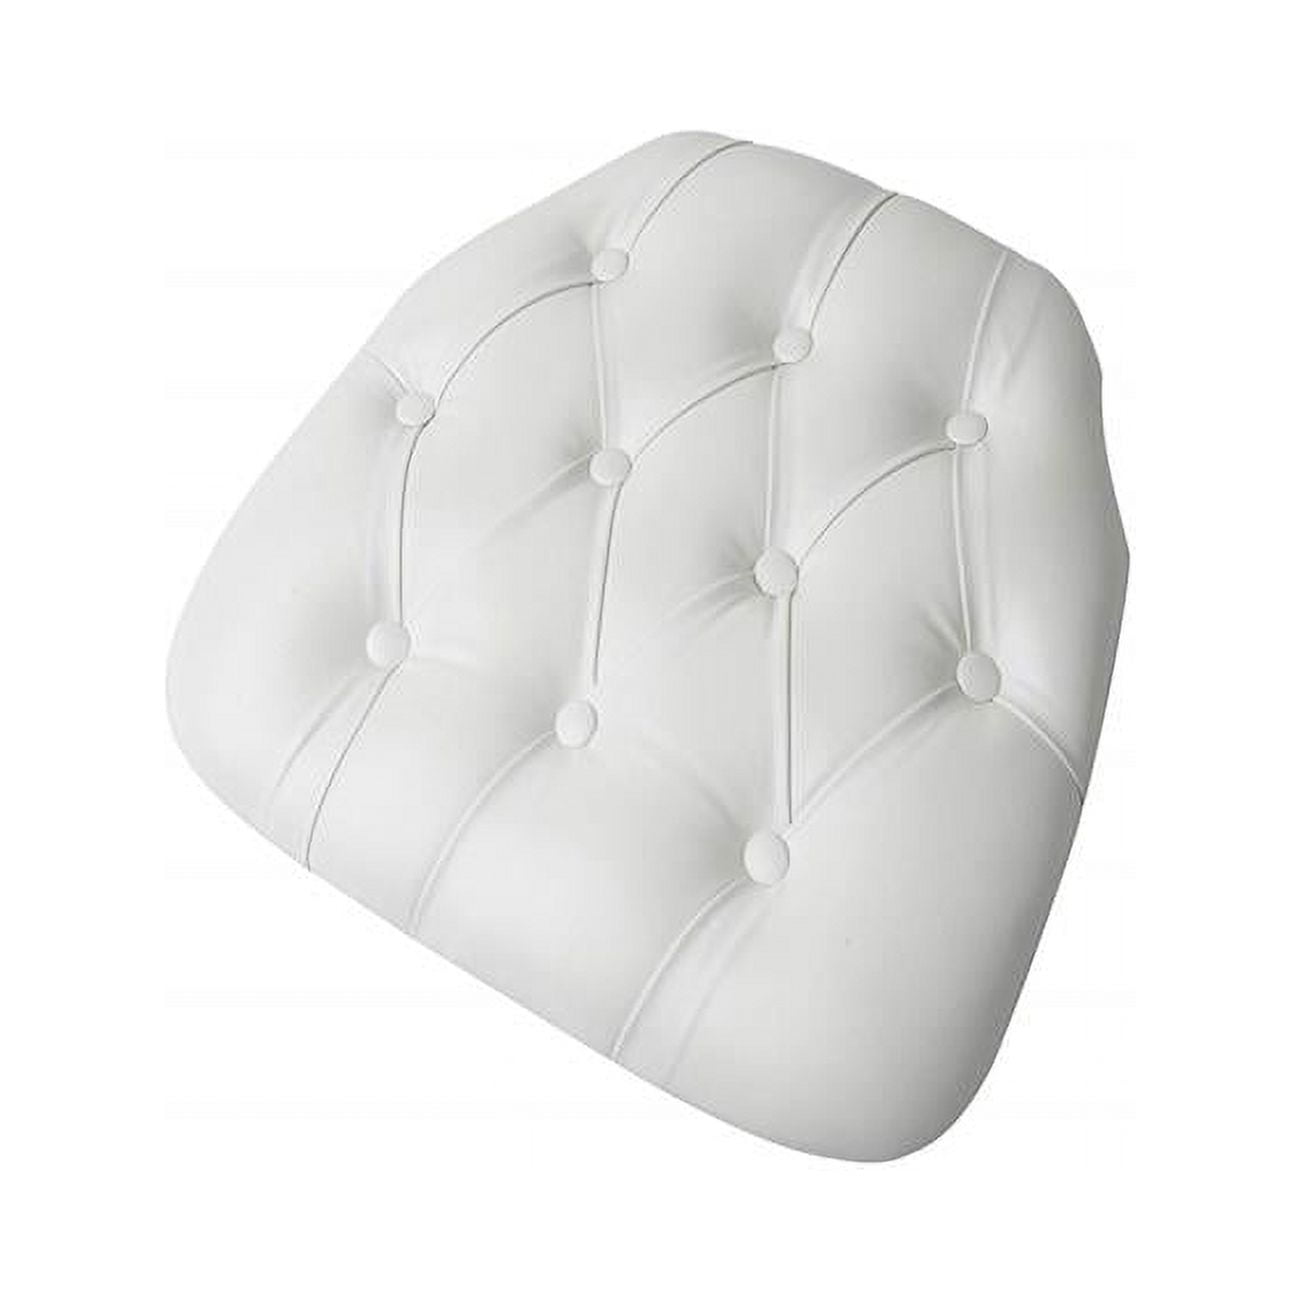 Cup-v-tufted-wh-web4 Indoor & Outdoor White Tufted Vinyl Cushions, Set Of 4 - 2 X 16 X 16 In.